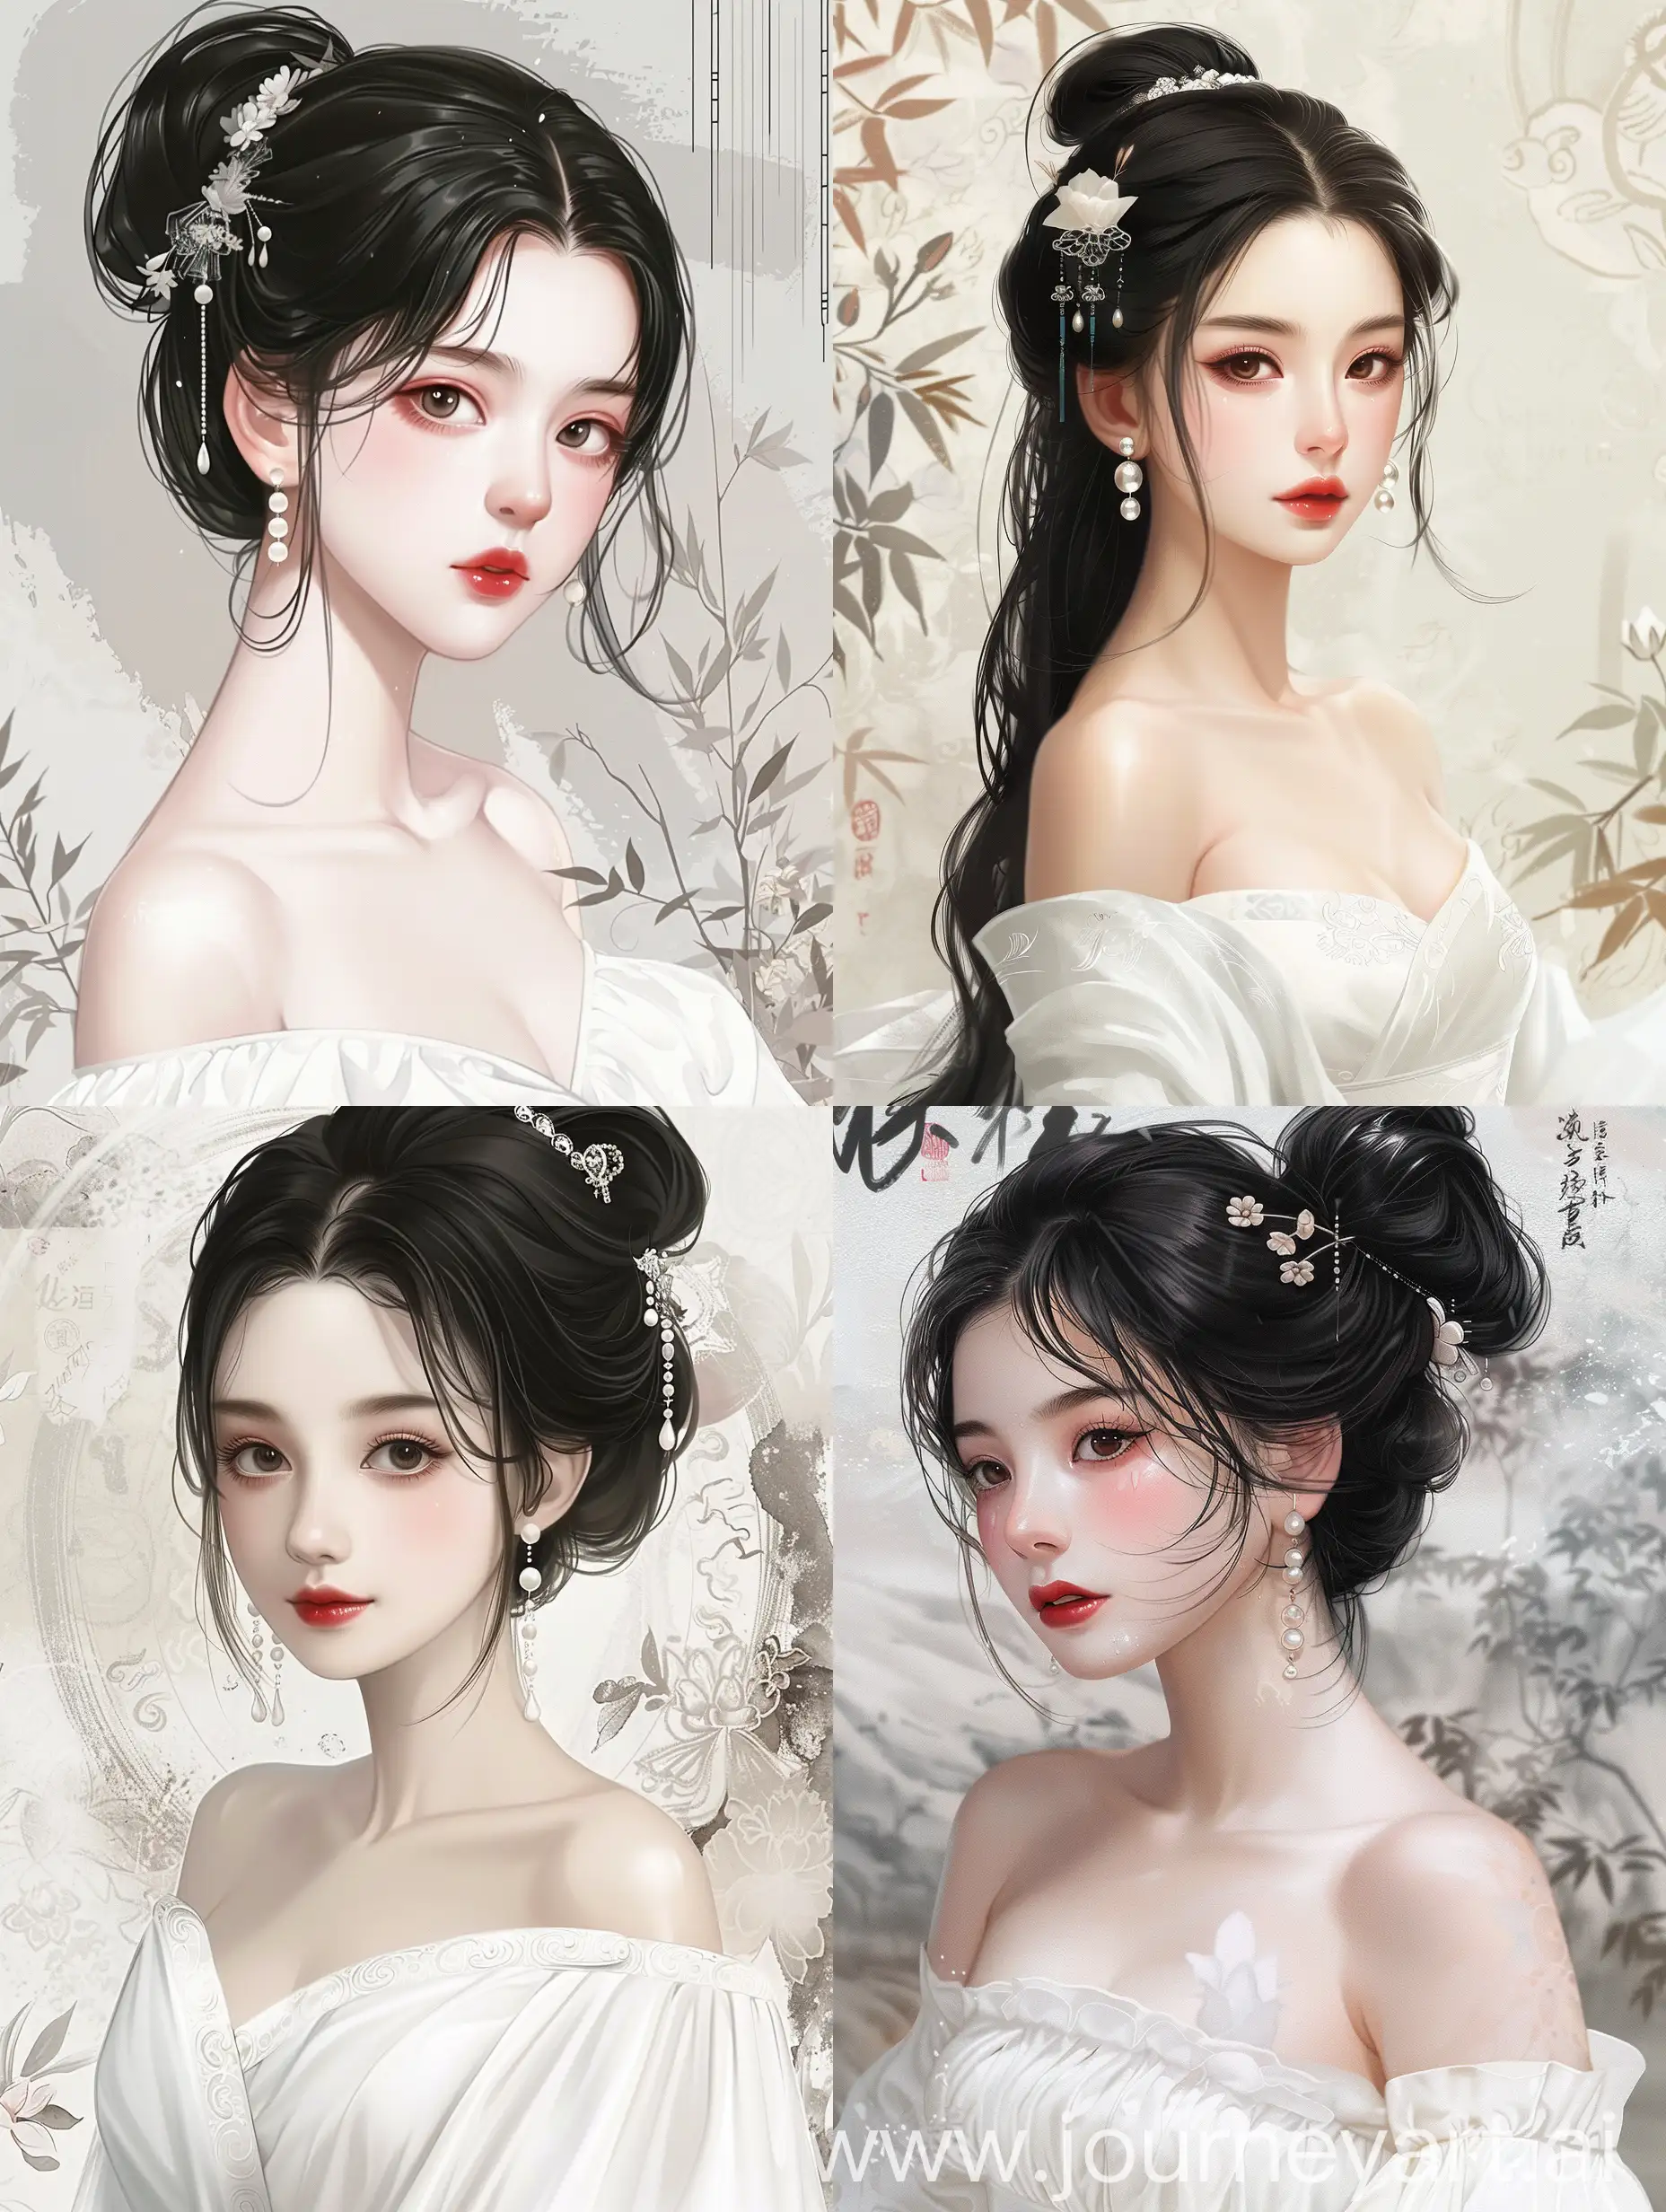 A beautiful Chinese girl with black hair, pearl earrings and a white dress in the style of manga illustration. She has exquisite facial features, fair skin, rosy cheeks, red lips, delicate makeup, and is dressed in an off-the-shoulder wedding gown. The background includes traditional ink wash patterns, adding to her classical beauty. 